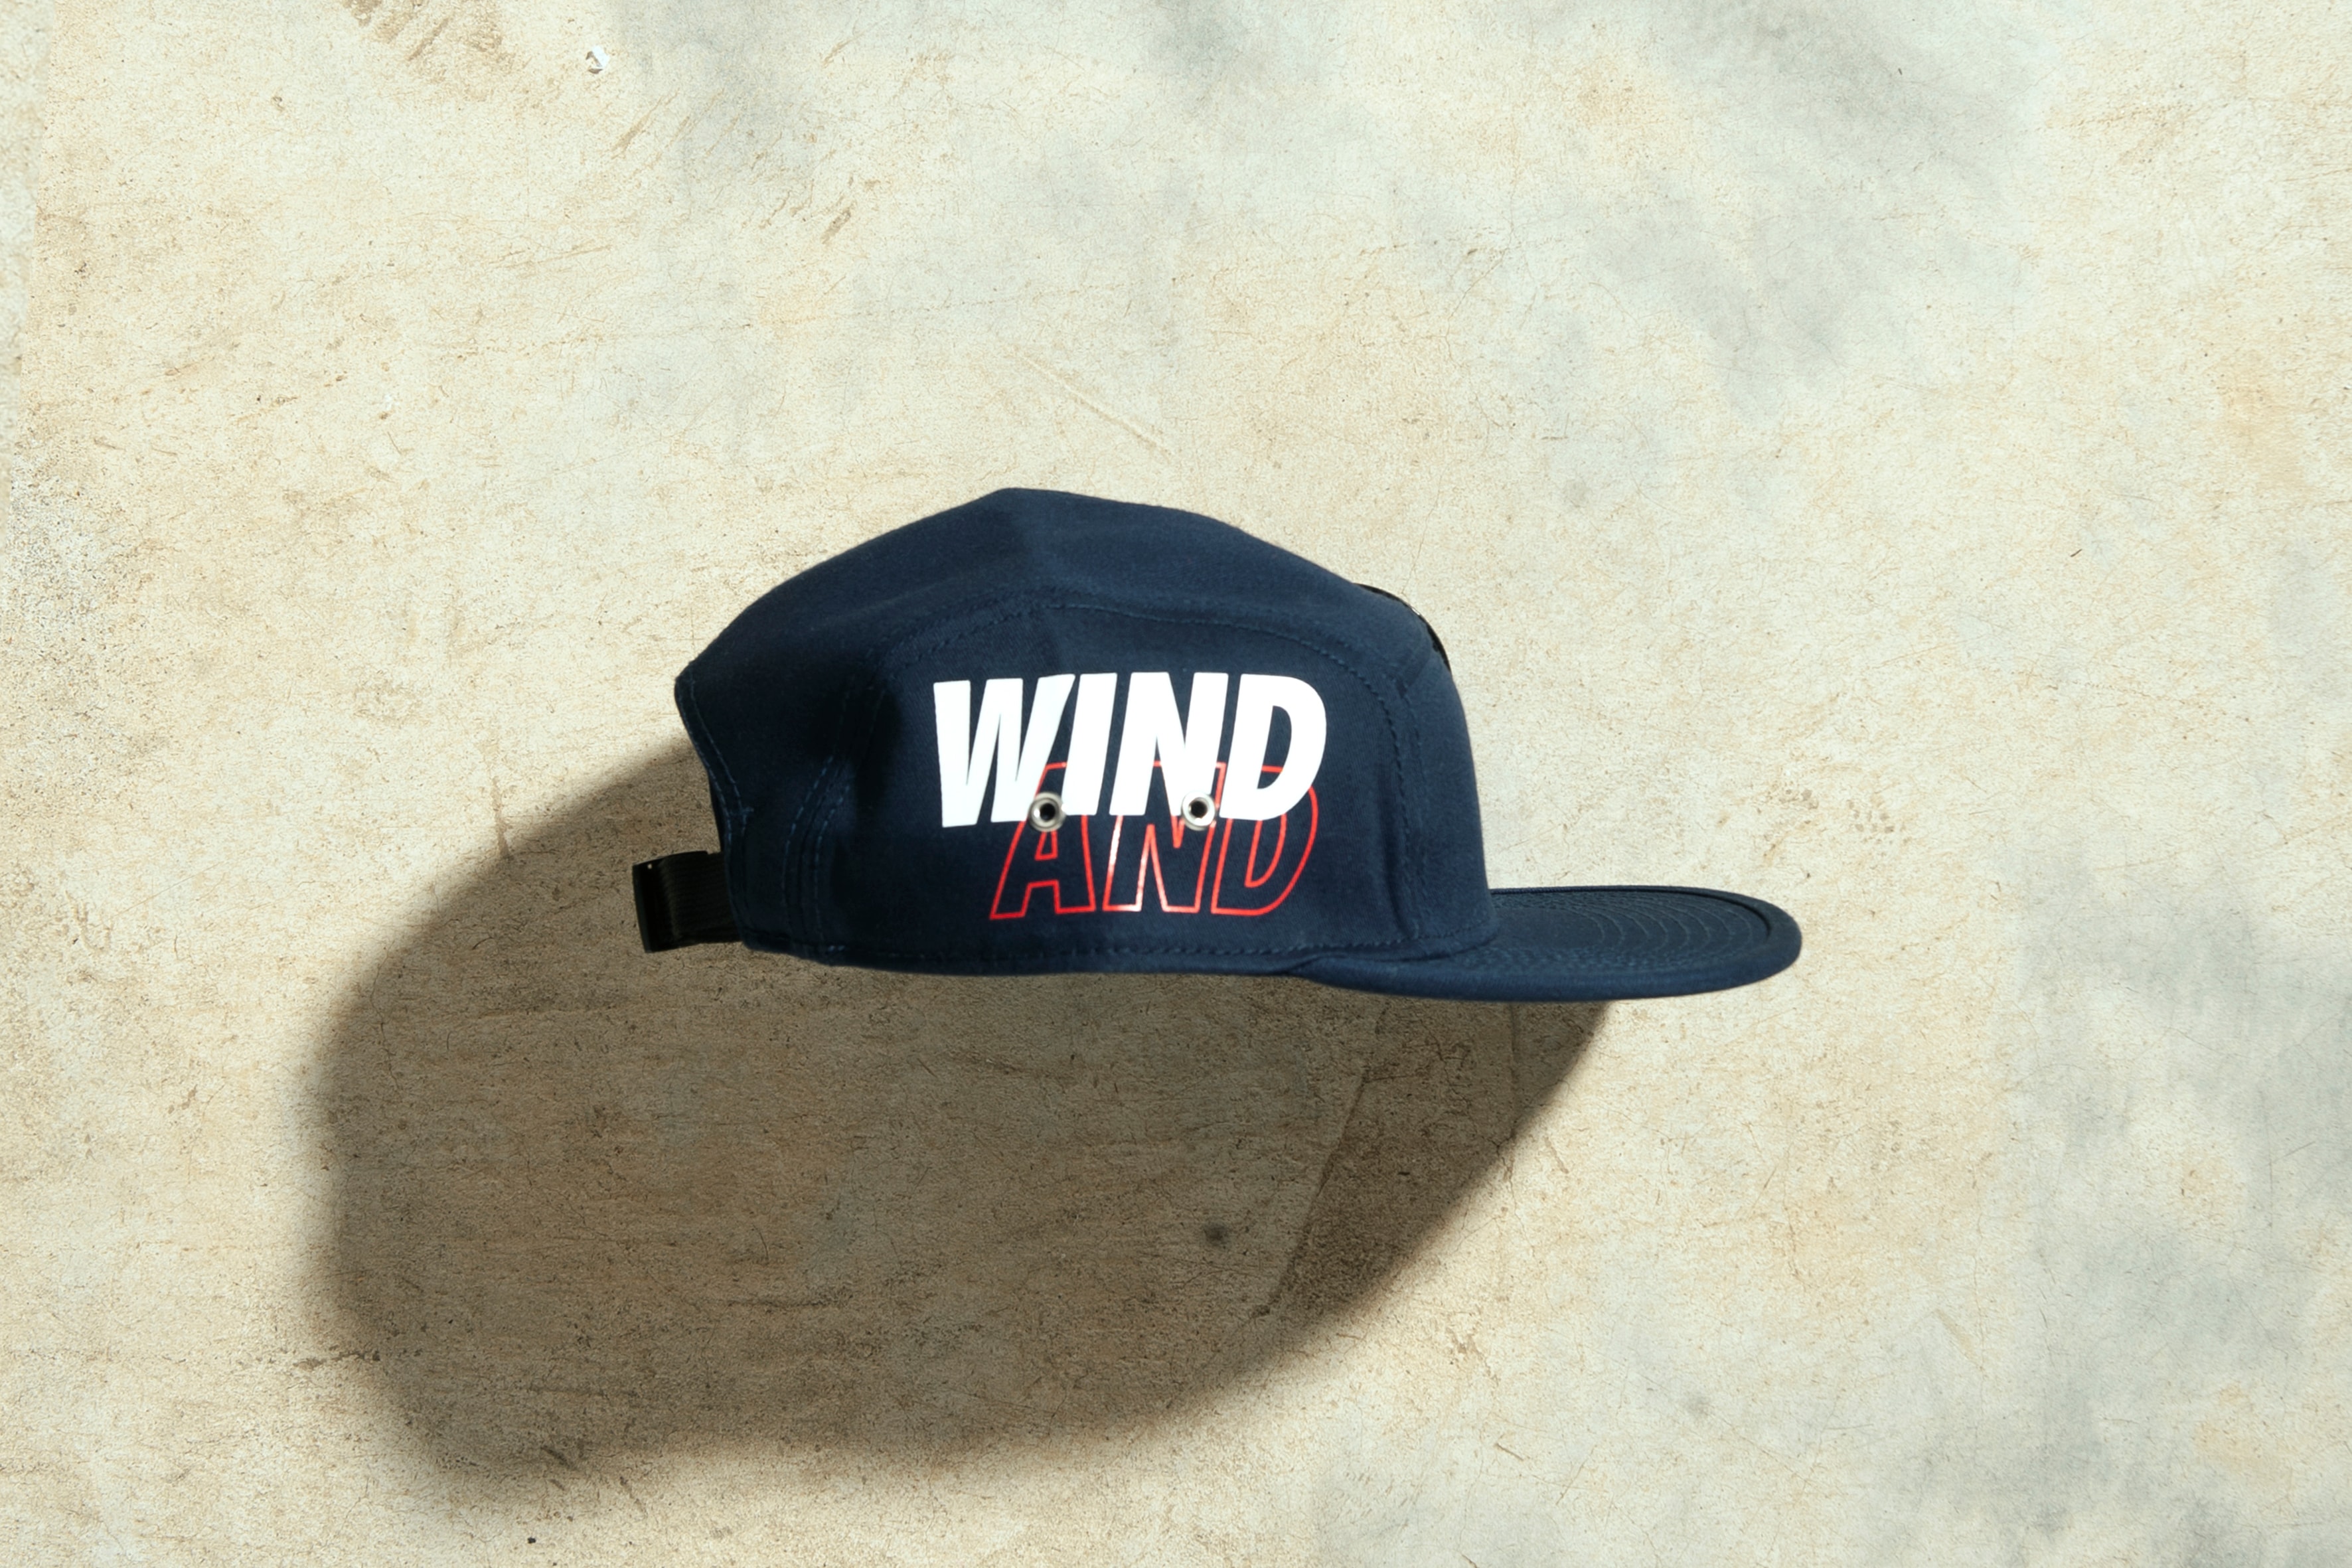 WIND AND SEA x G.R.S Kowloon 期間限定店即將開幕